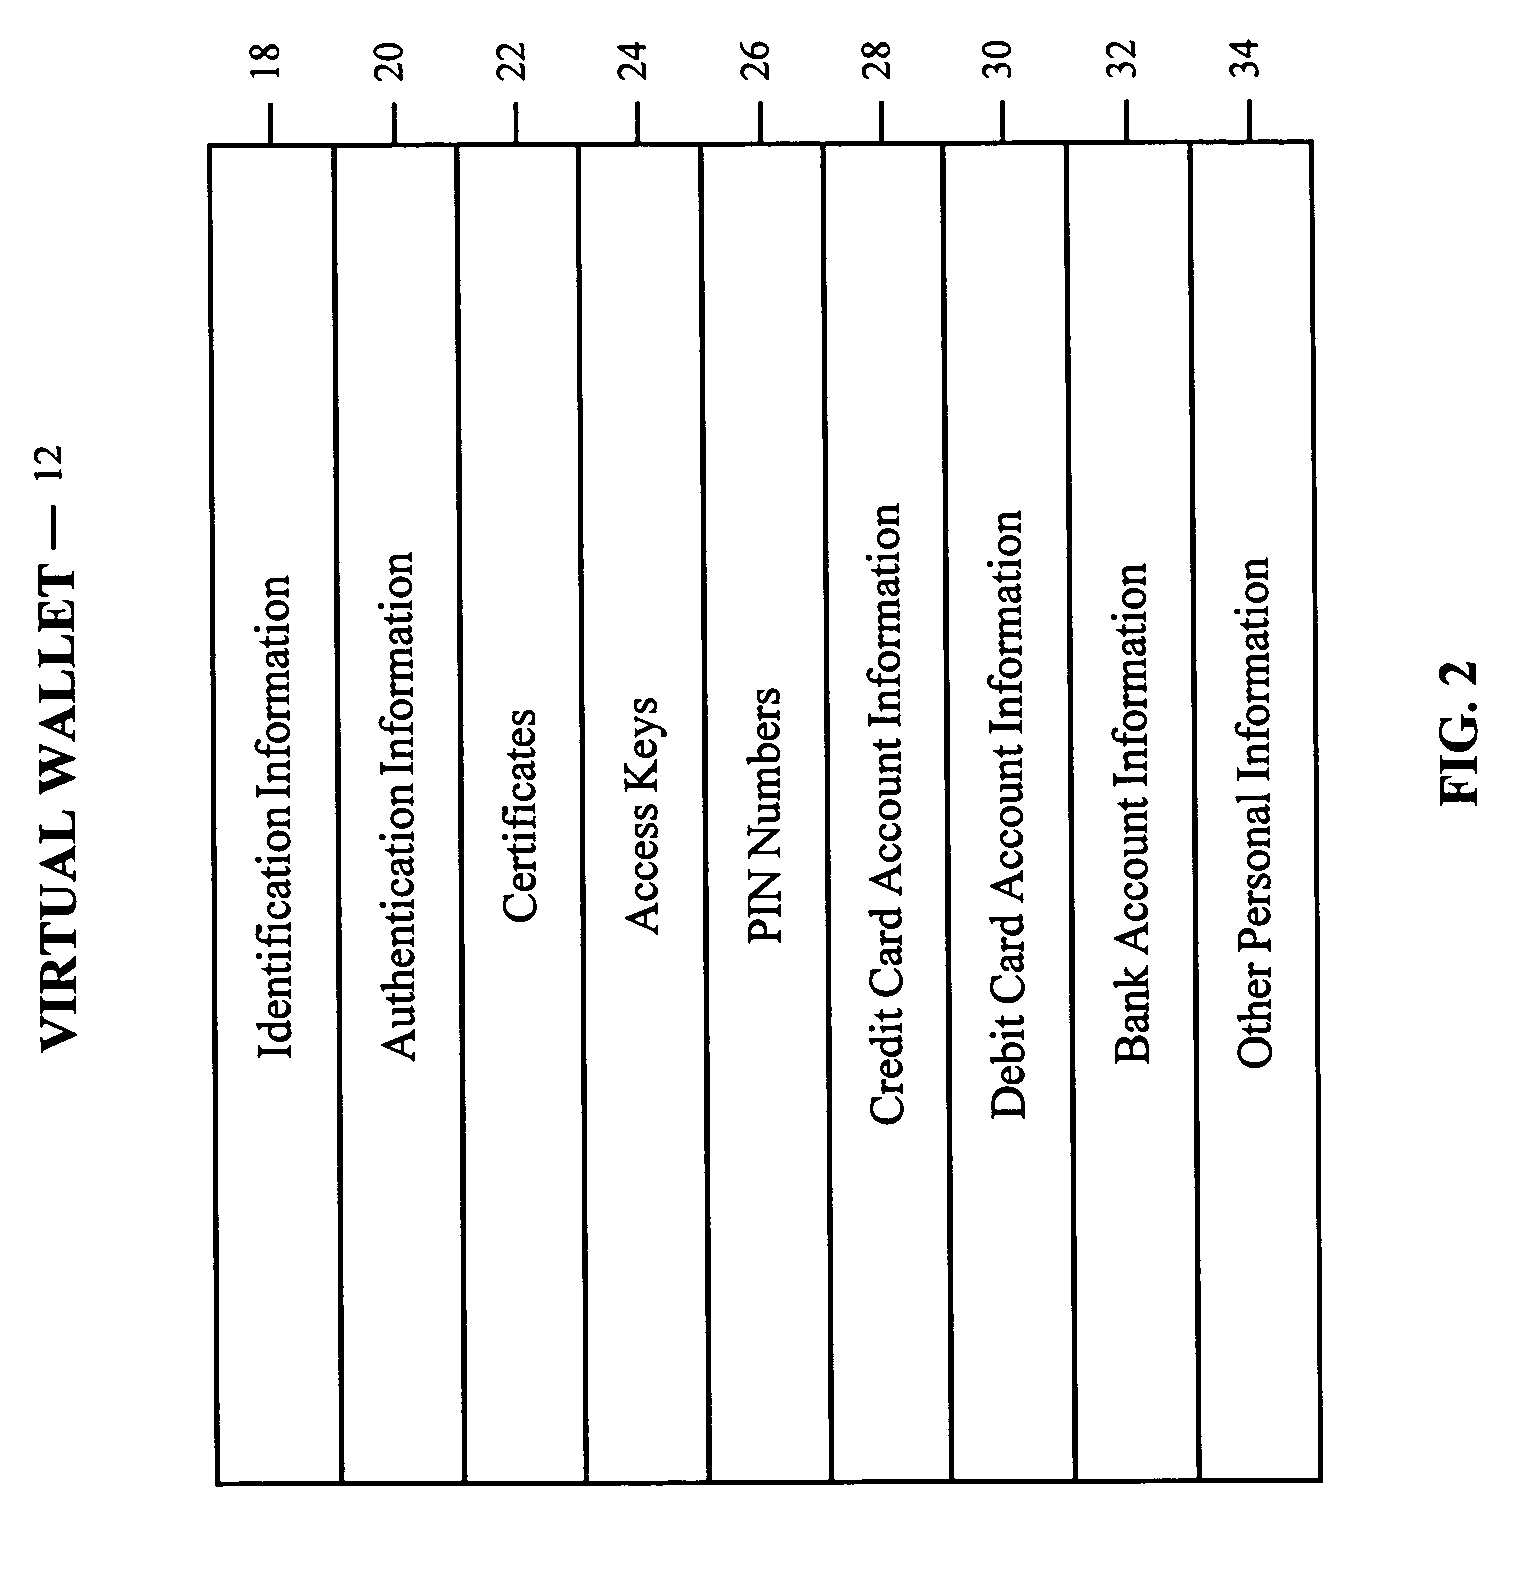 System and method for securely storing electronic data